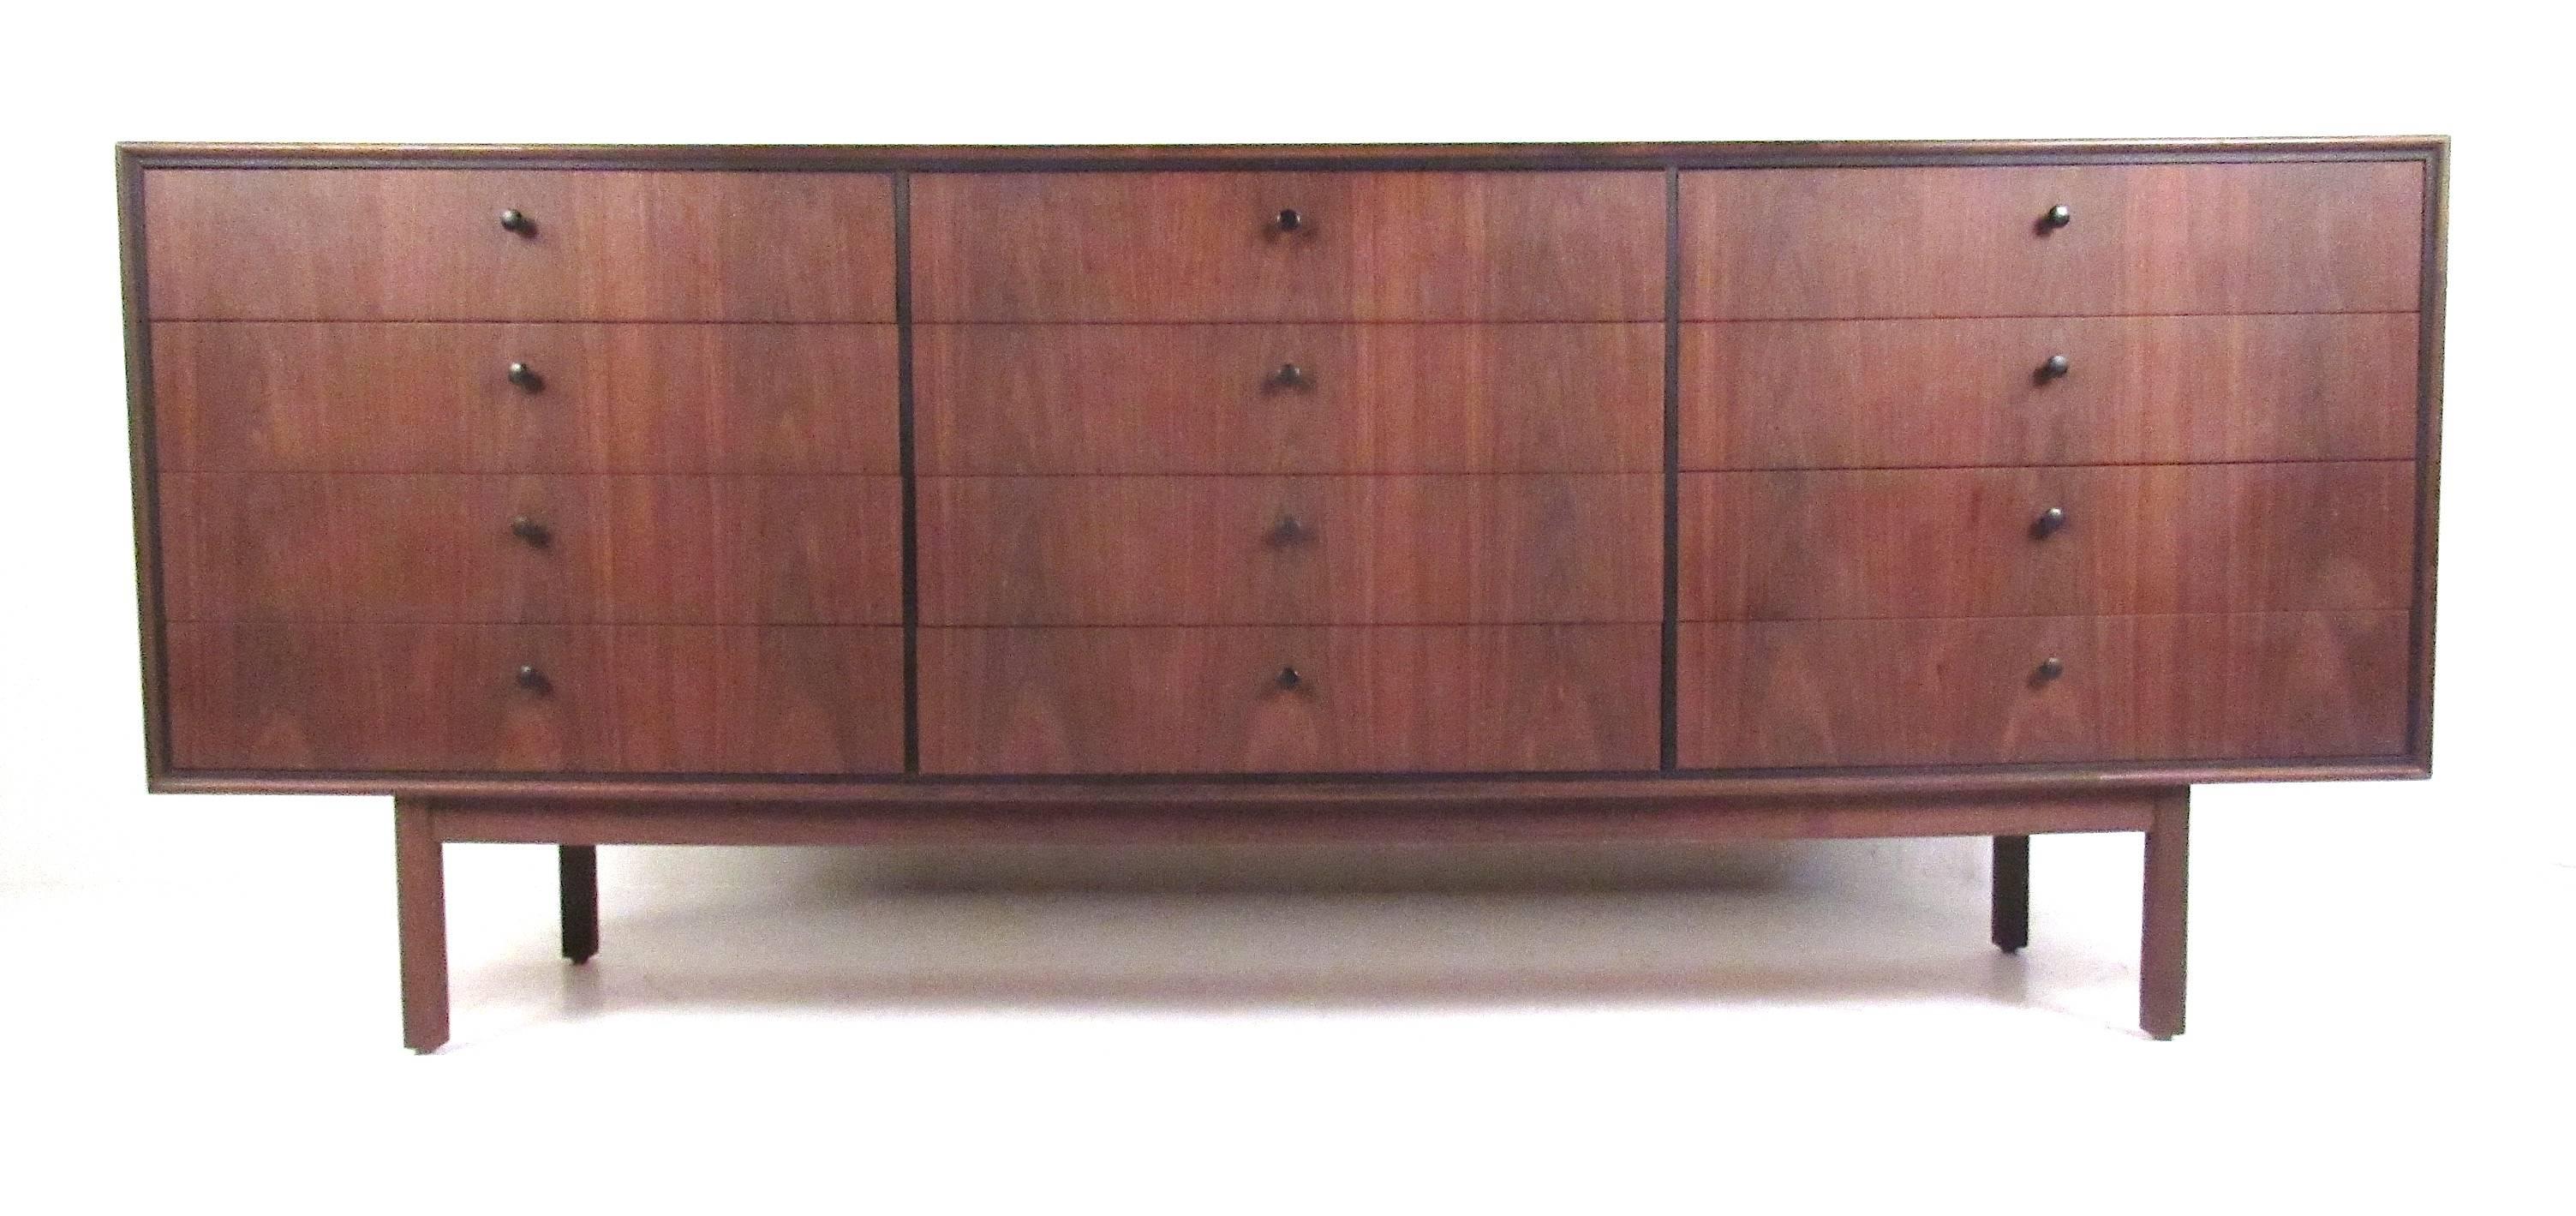 Beautiful, matching grain, 12-drawer walnut dresser with black pulls and detail trim. An elegant Mid-Century storage solution. Please confirm item location (NY or NJ) with dealer.
 